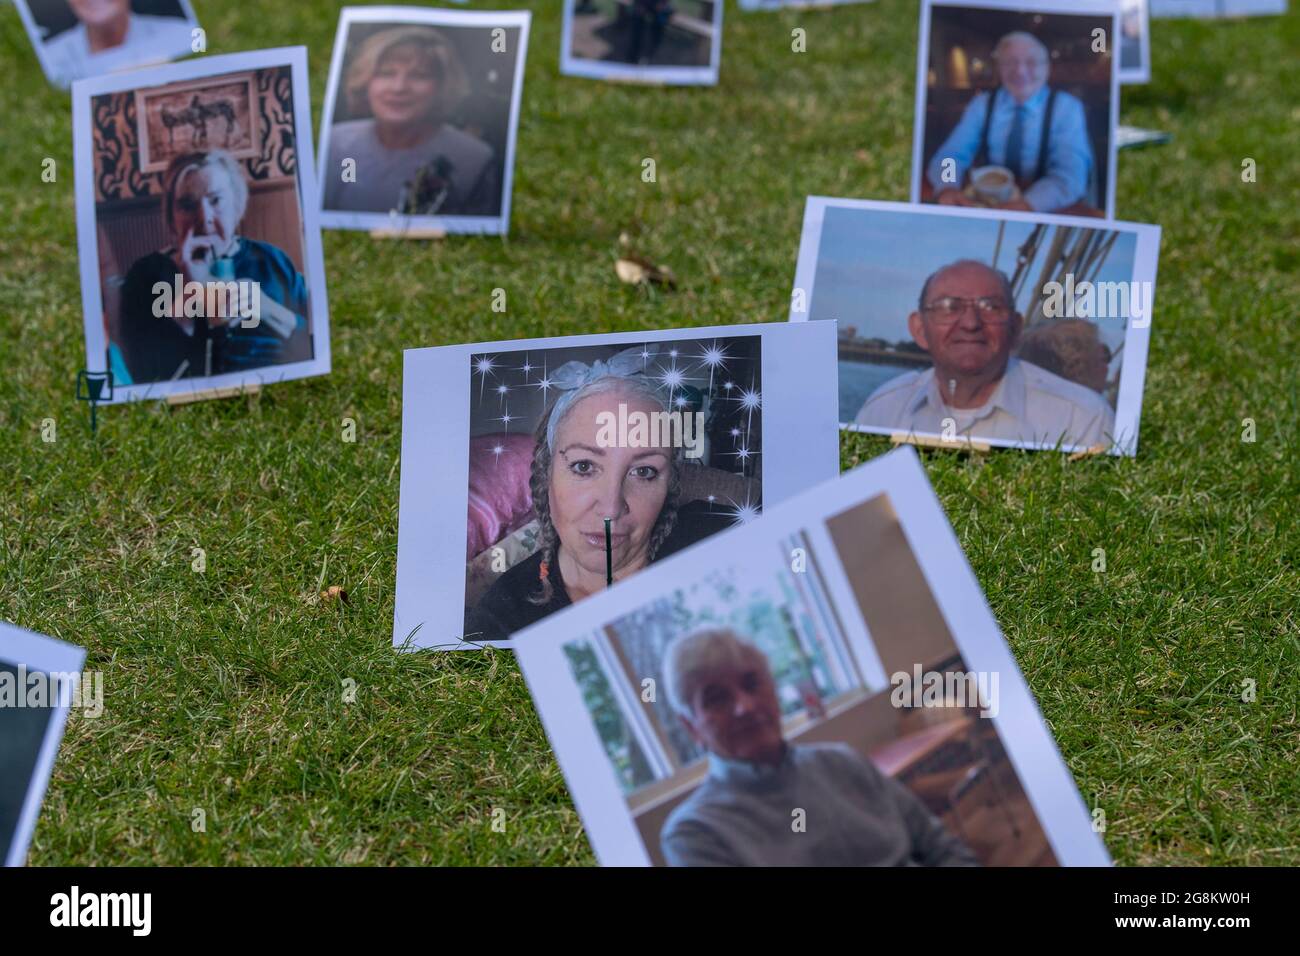 London, UK. 21st July, 2021. Covid-19 Bereaved families for Justice protest, Old Palace Yard Opposite the Houses of Parliament. 650 pictures (one for each MP) of those who have died from Covid-19 Credit: Ian Davidson/Alamy Live News Stock Photo